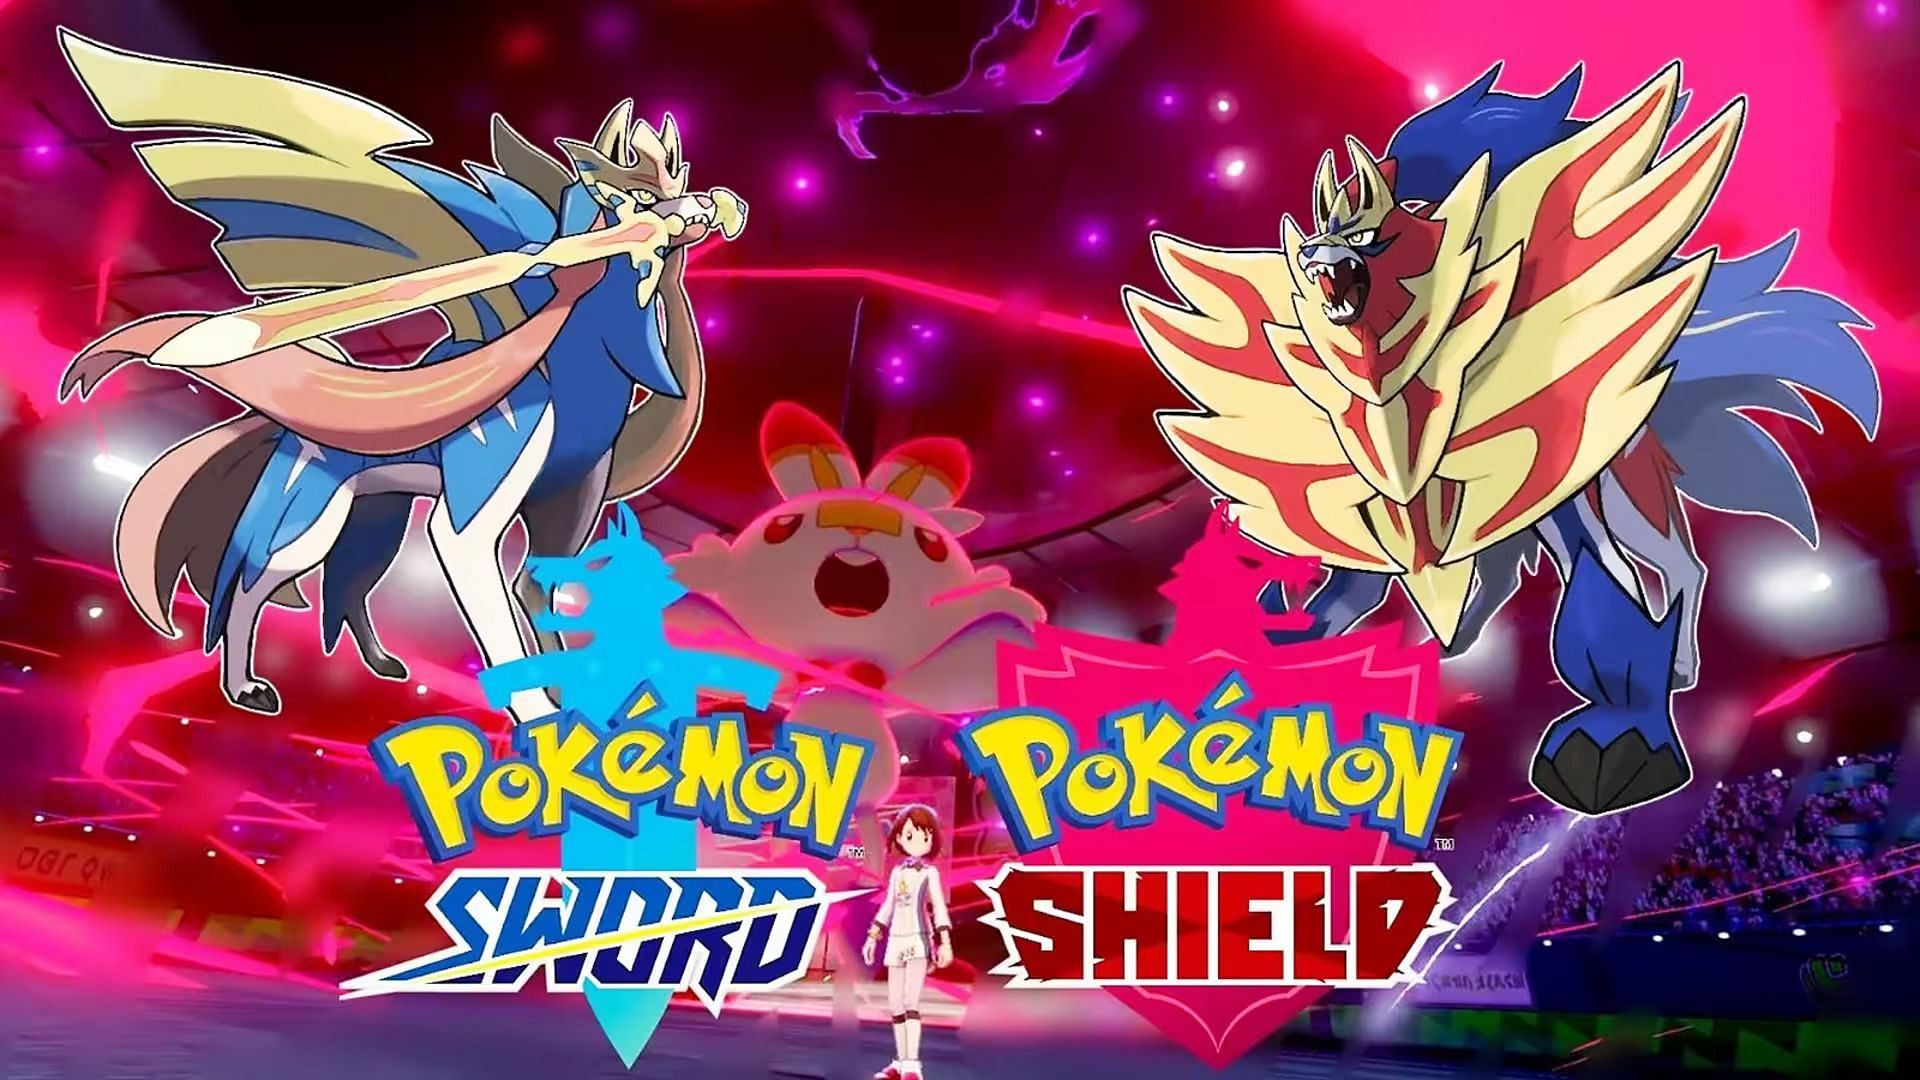 Best team for Pokemon Sword and Shield